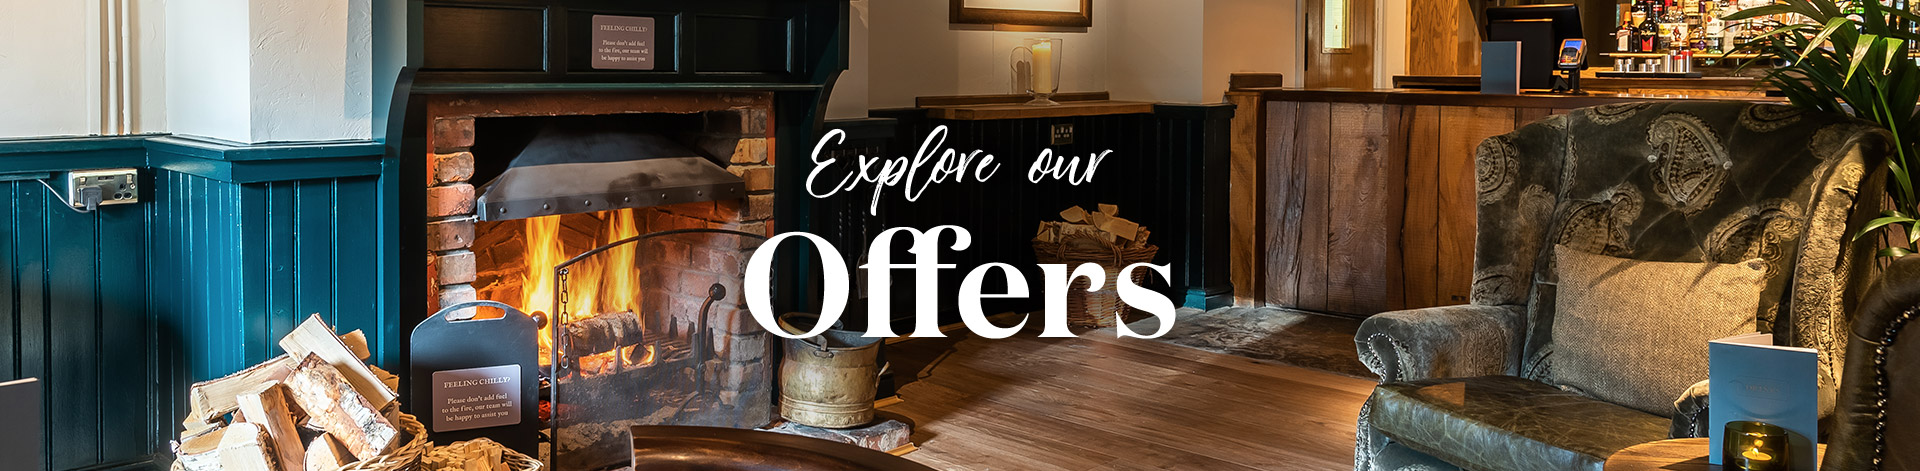 Our latest offers at The Fowler's Farm